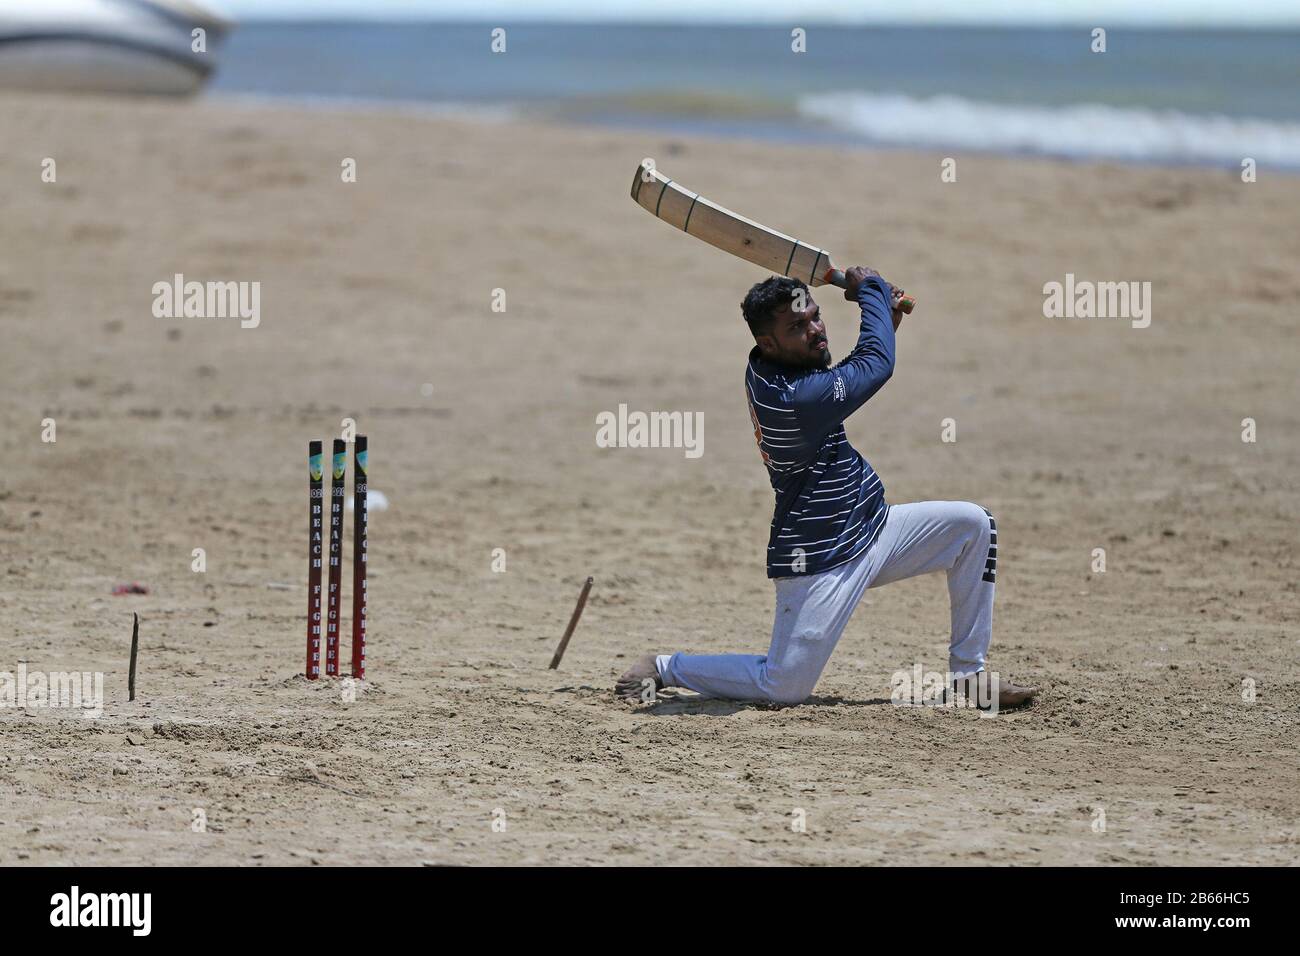 Sri Lankan cricket fans play a game of cricket on the beach at Galle, Sri Lanka 08 March 2020 (Photo: Nick Atkins /ESPA-Images) Stock Photo